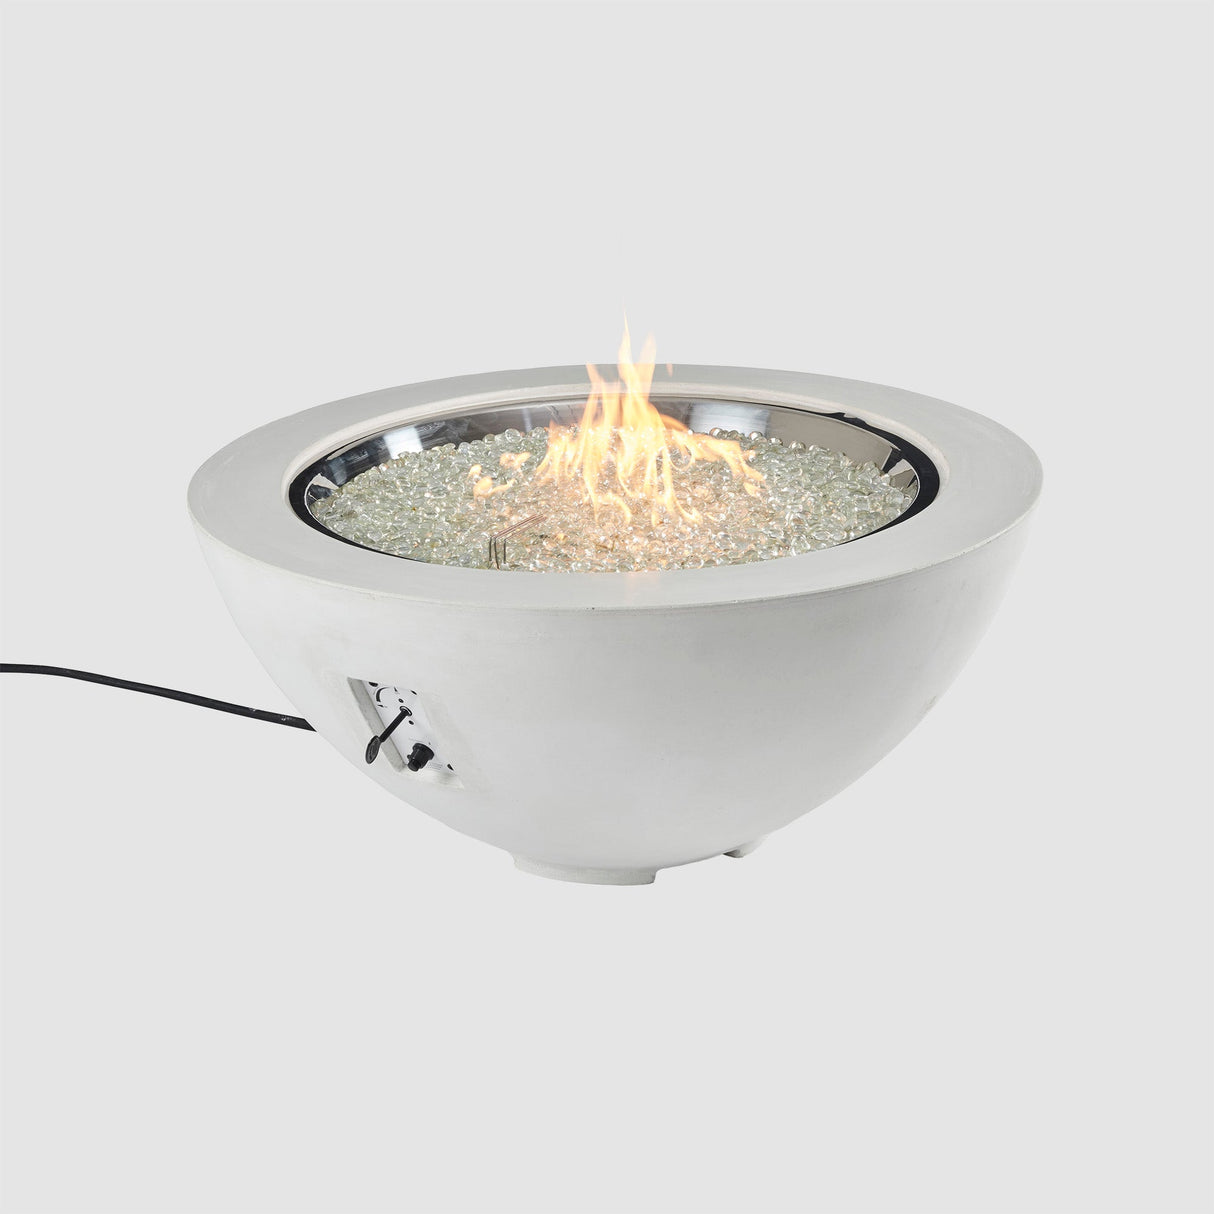 White Cove Round Gas Fire Pit Bowl 42" on a grey background